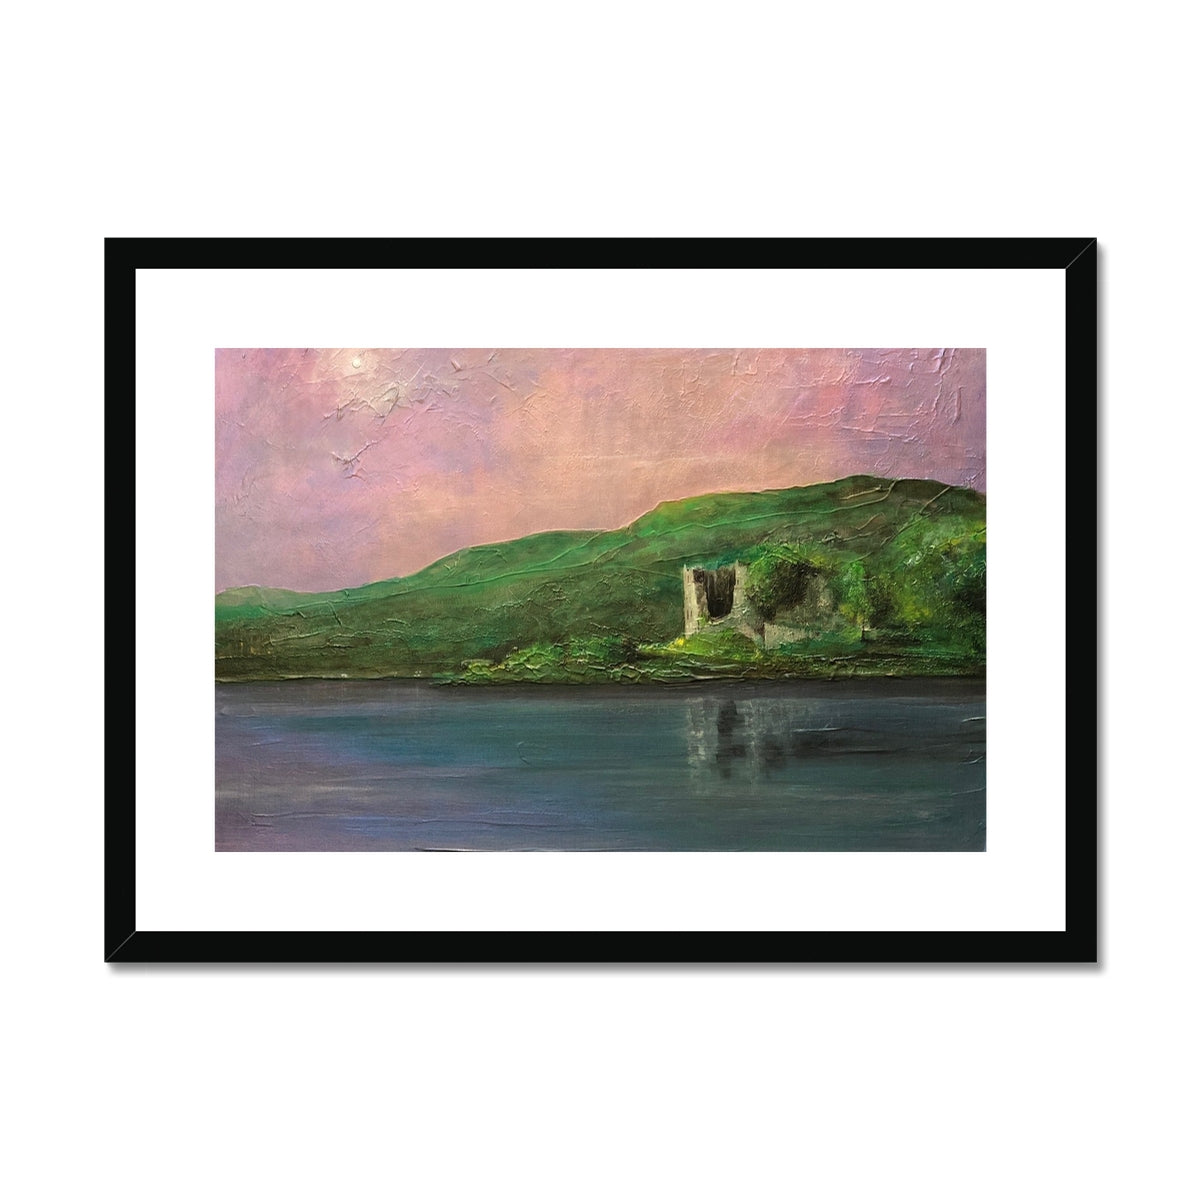 Old Castle Lachlan Painting | Framed & Mounted Prints From Scotland-Framed & Mounted Prints-Historic & Iconic Scotland Art Gallery-A2 Landscape-Black Frame-Paintings, Prints, Homeware, Art Gifts From Scotland By Scottish Artist Kevin Hunter